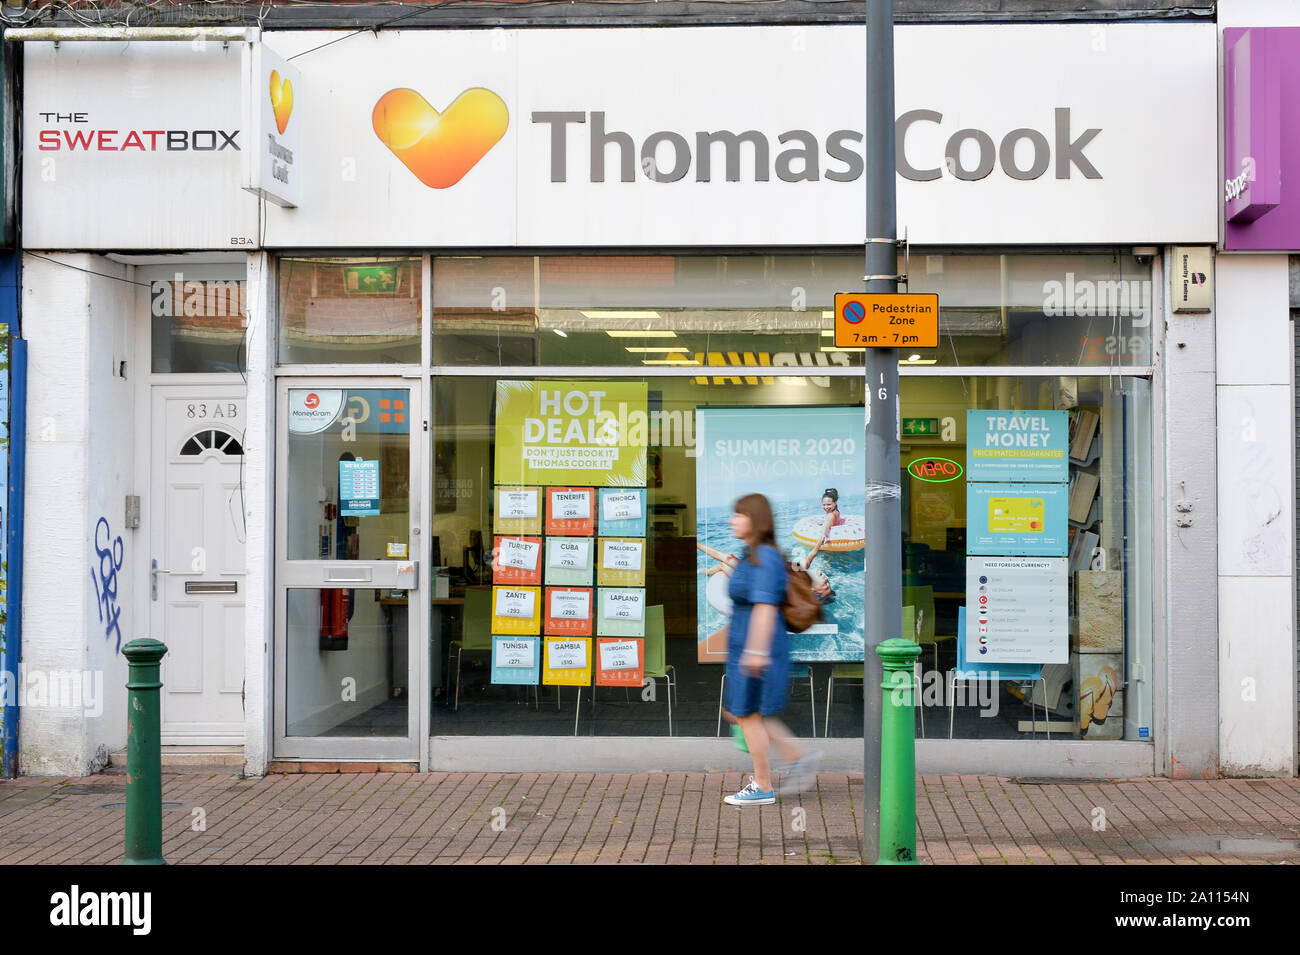 A closed Thomas Cook shop on East Street, Bedminster, Bristol, as the 178-year-old tour operator Thomas Cook which has ceased trading with immediate effect after failing in a final bid to secure a rescue package from creditors. Stock Photo